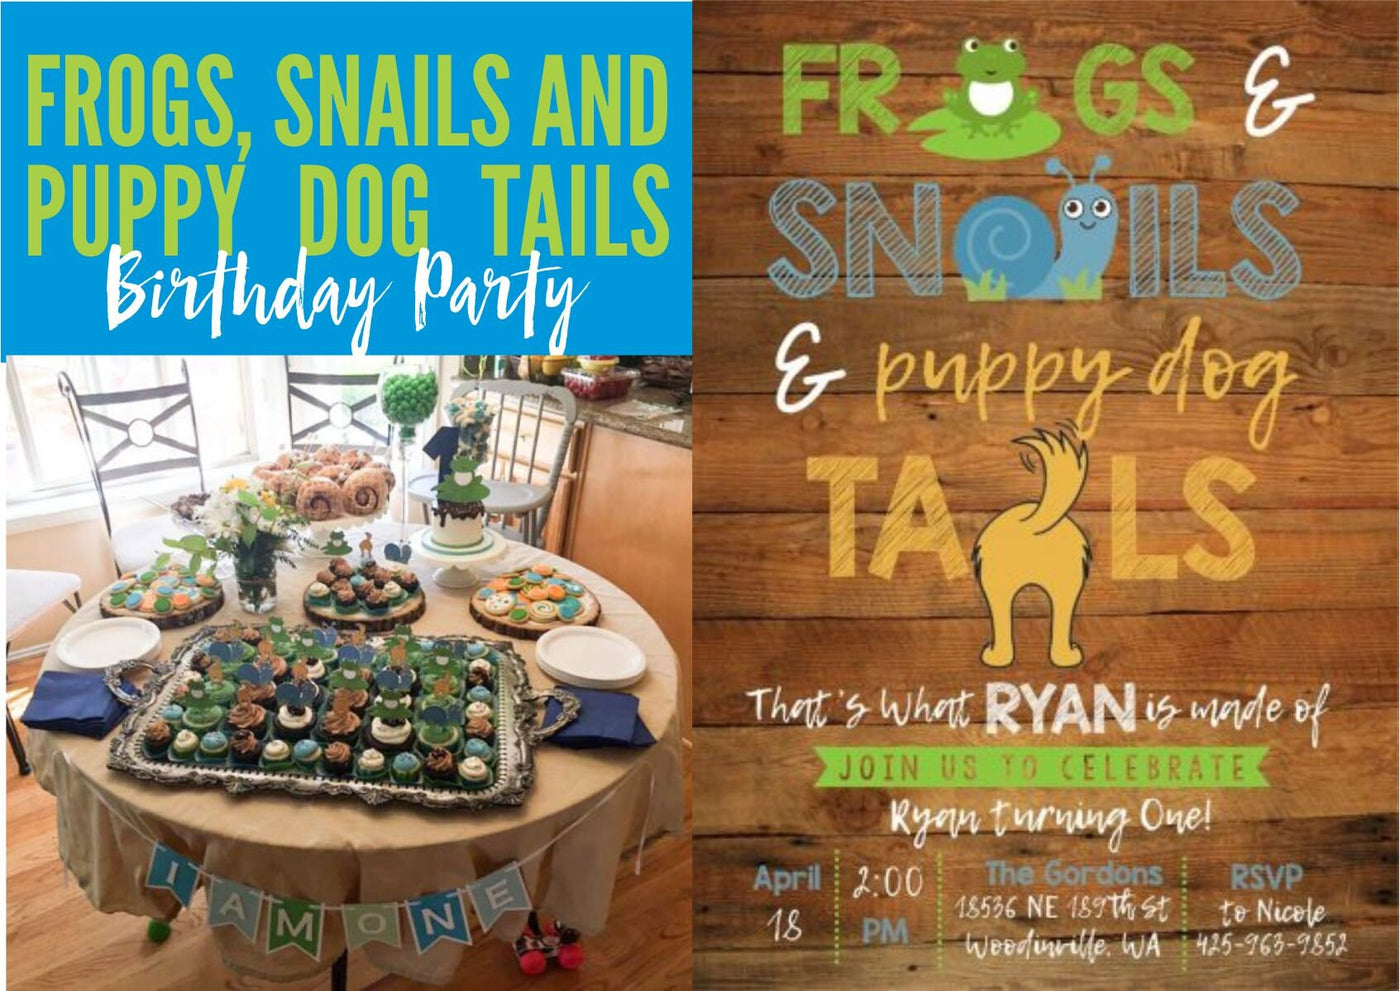 Snips and Snails Invite, Frogs and Snails invitation. Snips and Snails Birthday Party Invitation, Frogs and Snails Puppy Dog Tails Invite